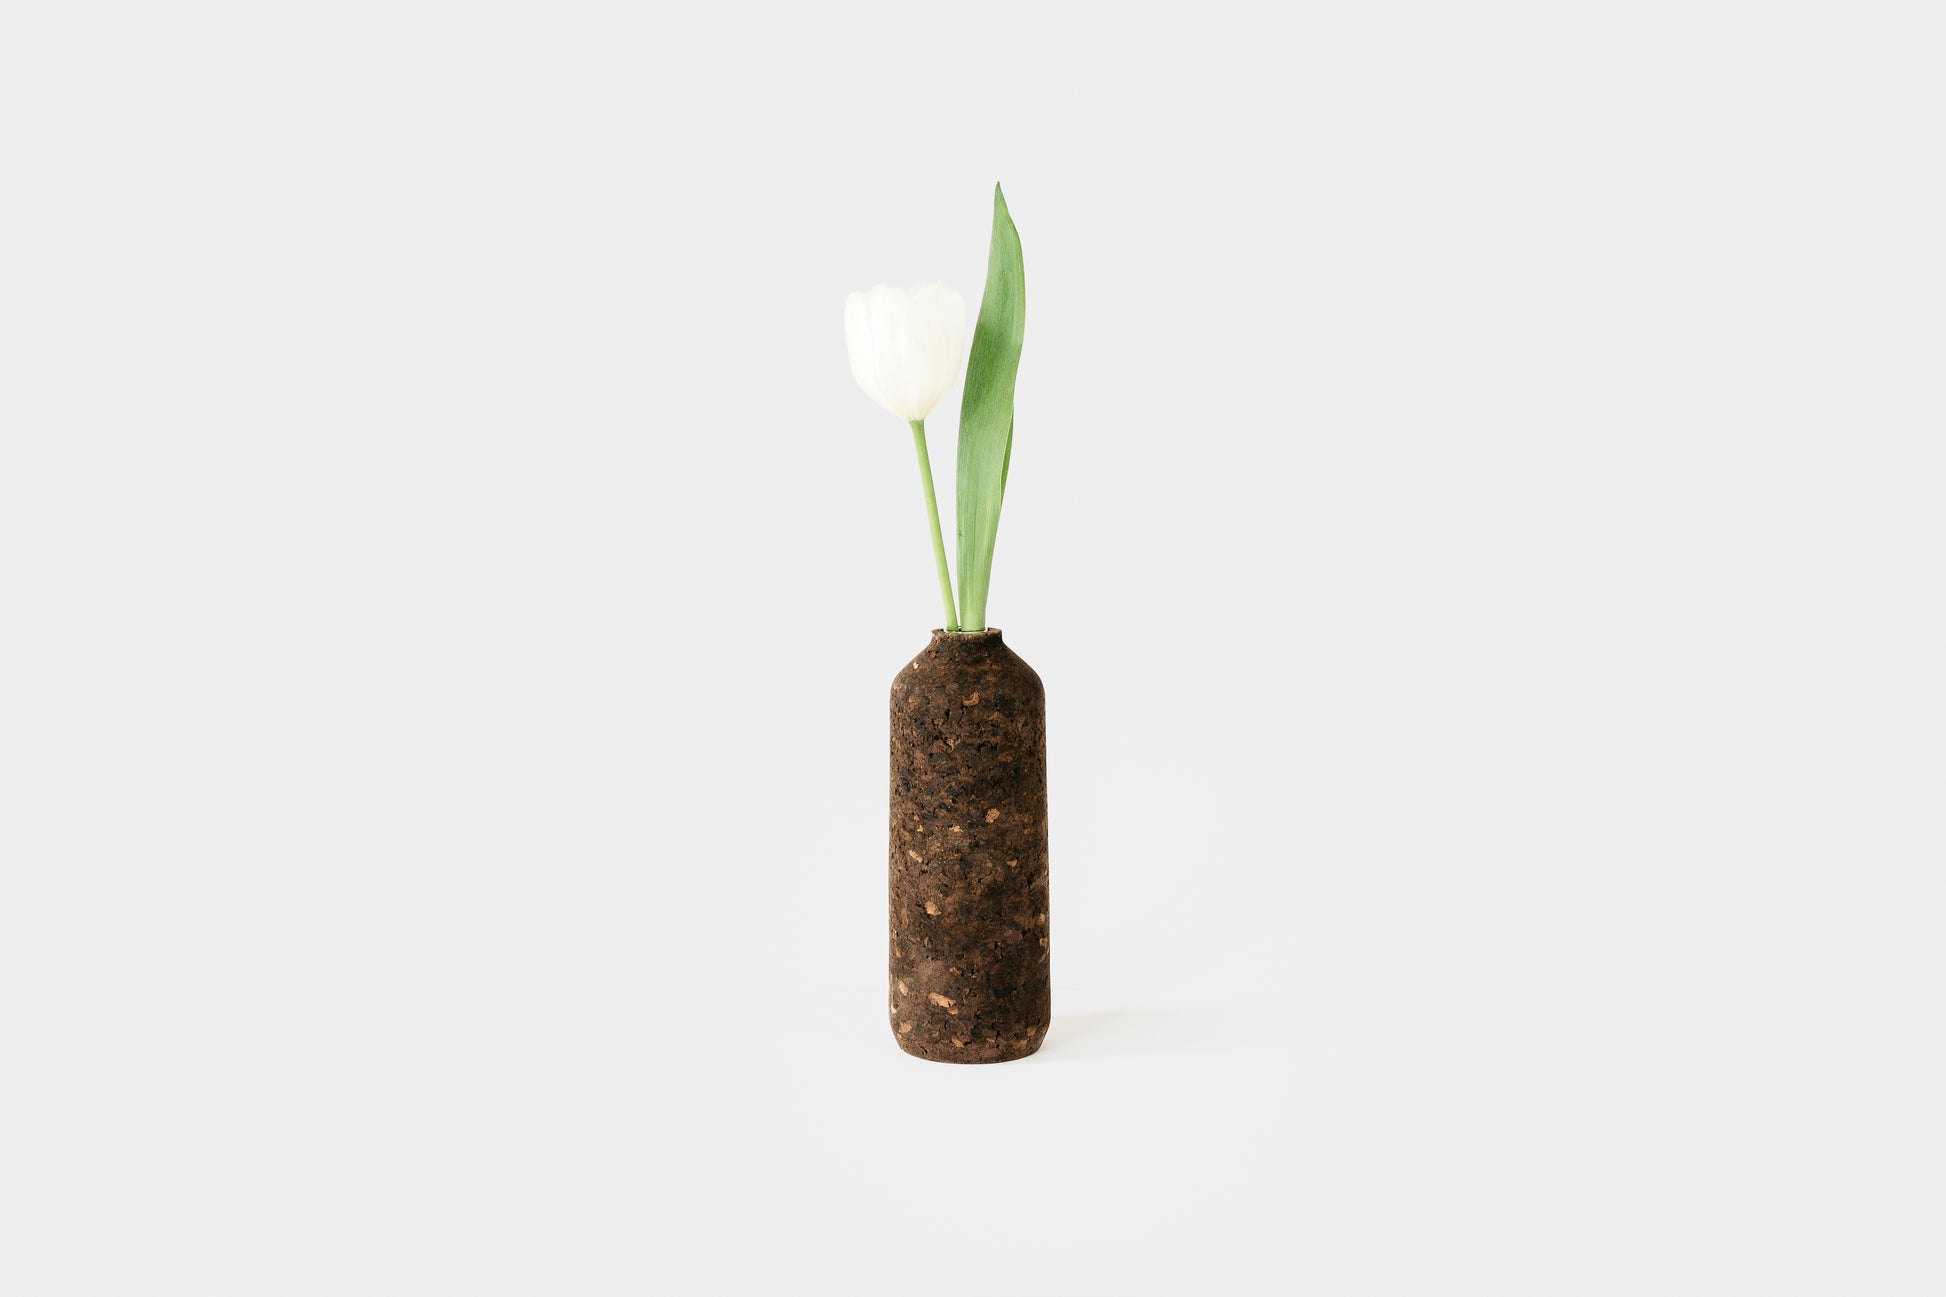 Charcoal cork tall vase, hand- turned with white tulip. By Melanie Abrantes Designs.